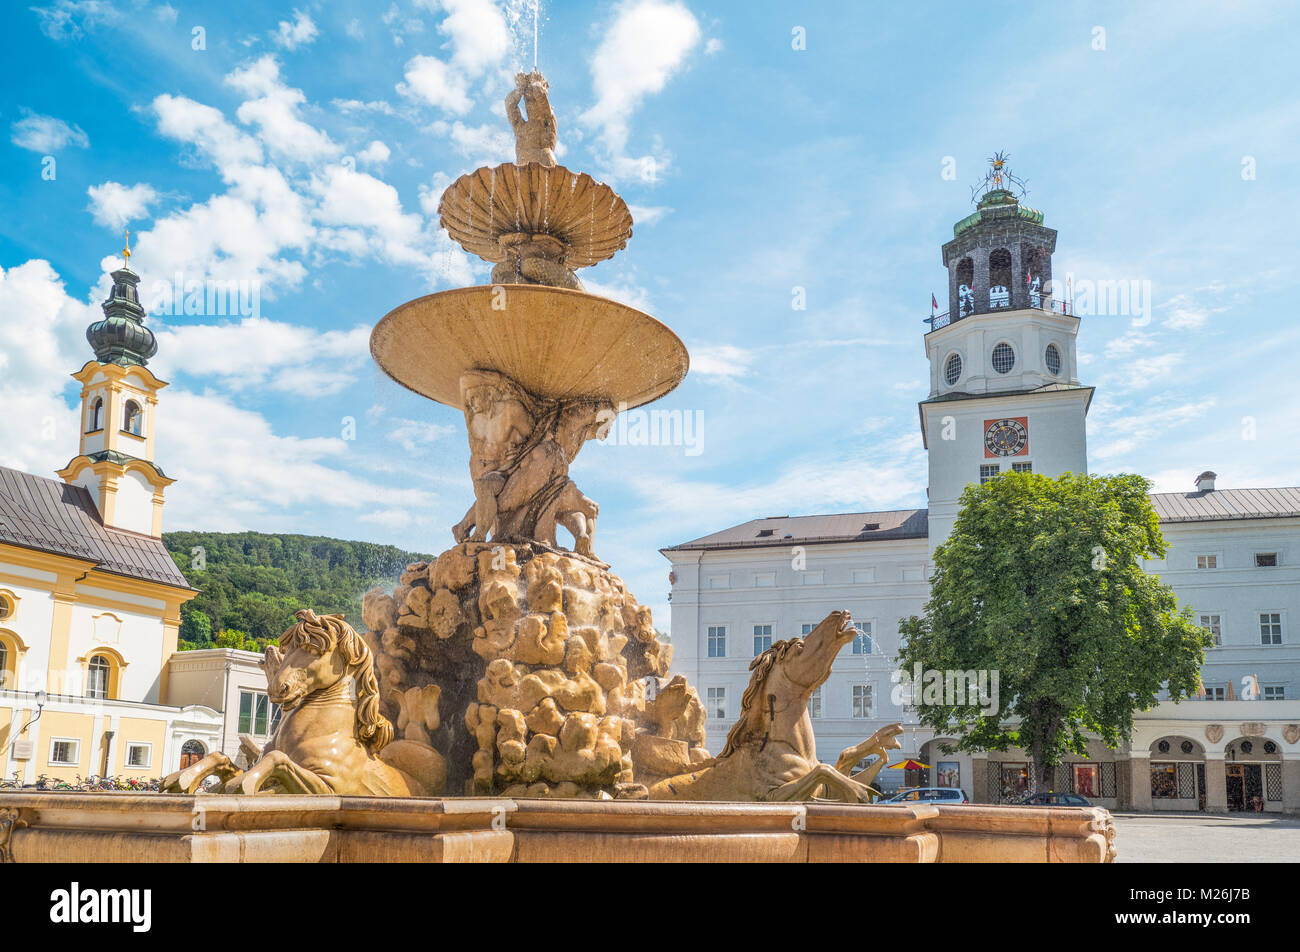 Austria, Salzburg, the fountain of Residence square in the old town Stock Photo